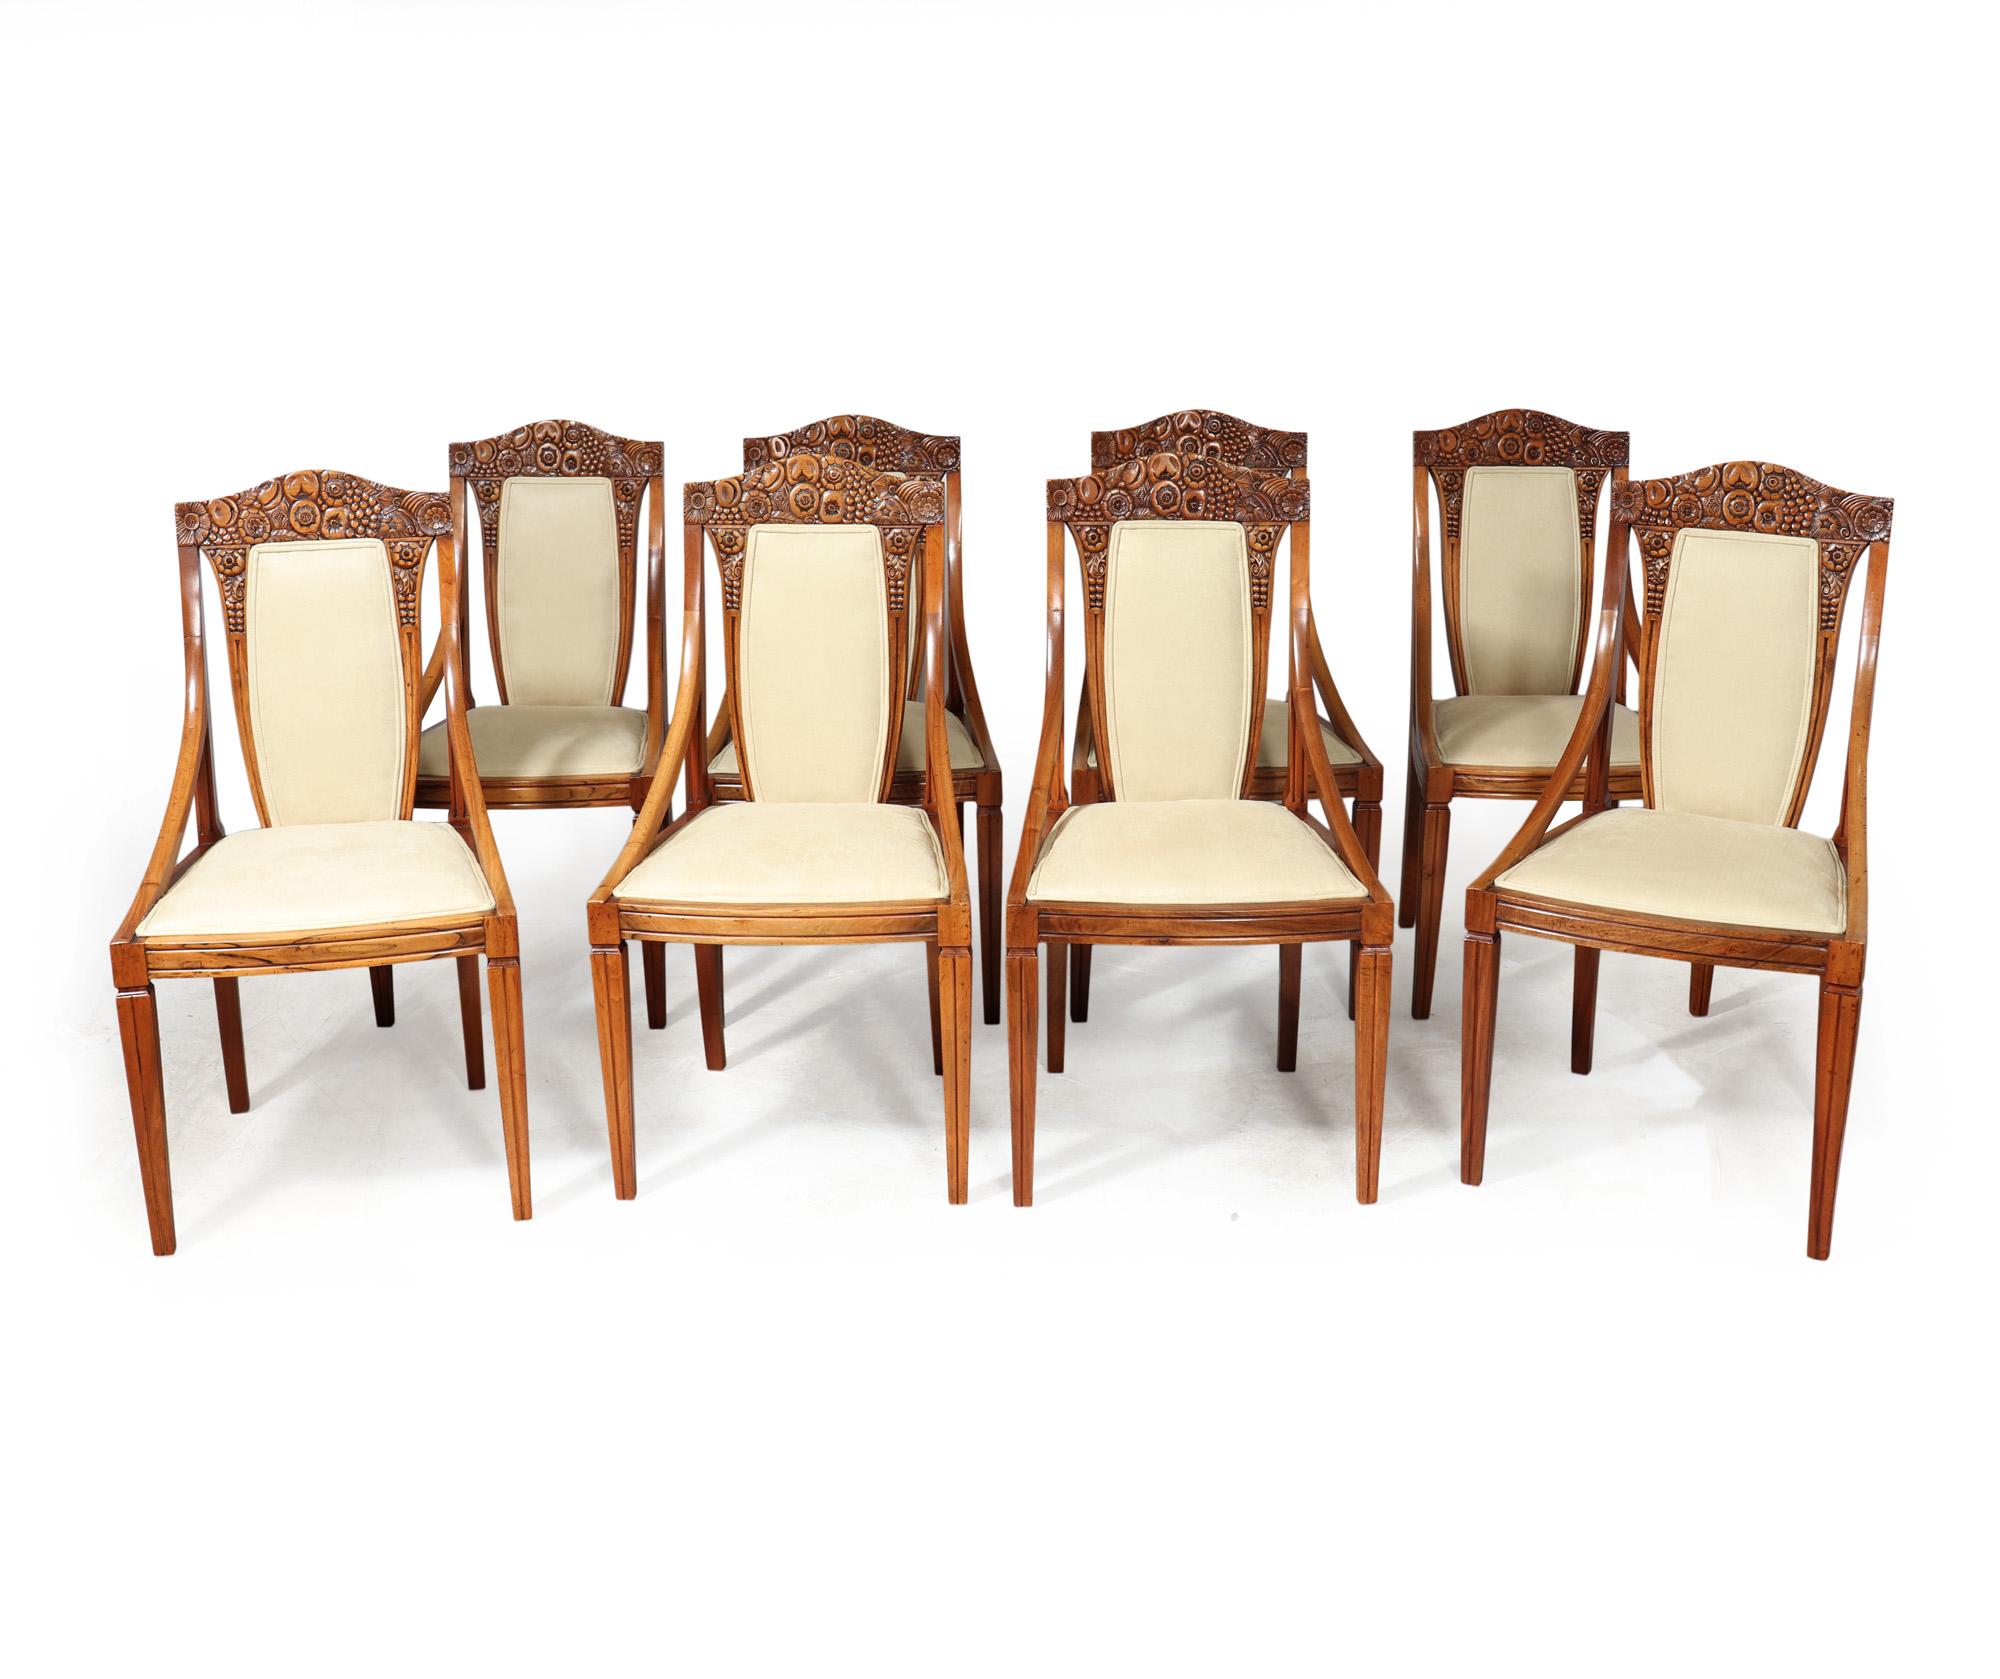 FRENCH ART DECO DINING CHAIRS
A stunning set of eight solid walnut dining chairs lovely quality with floral carved backs in the manner of Paul Follot, these are early Art Deco almost Art Nouveau, having a square tapering leg gently curved front and